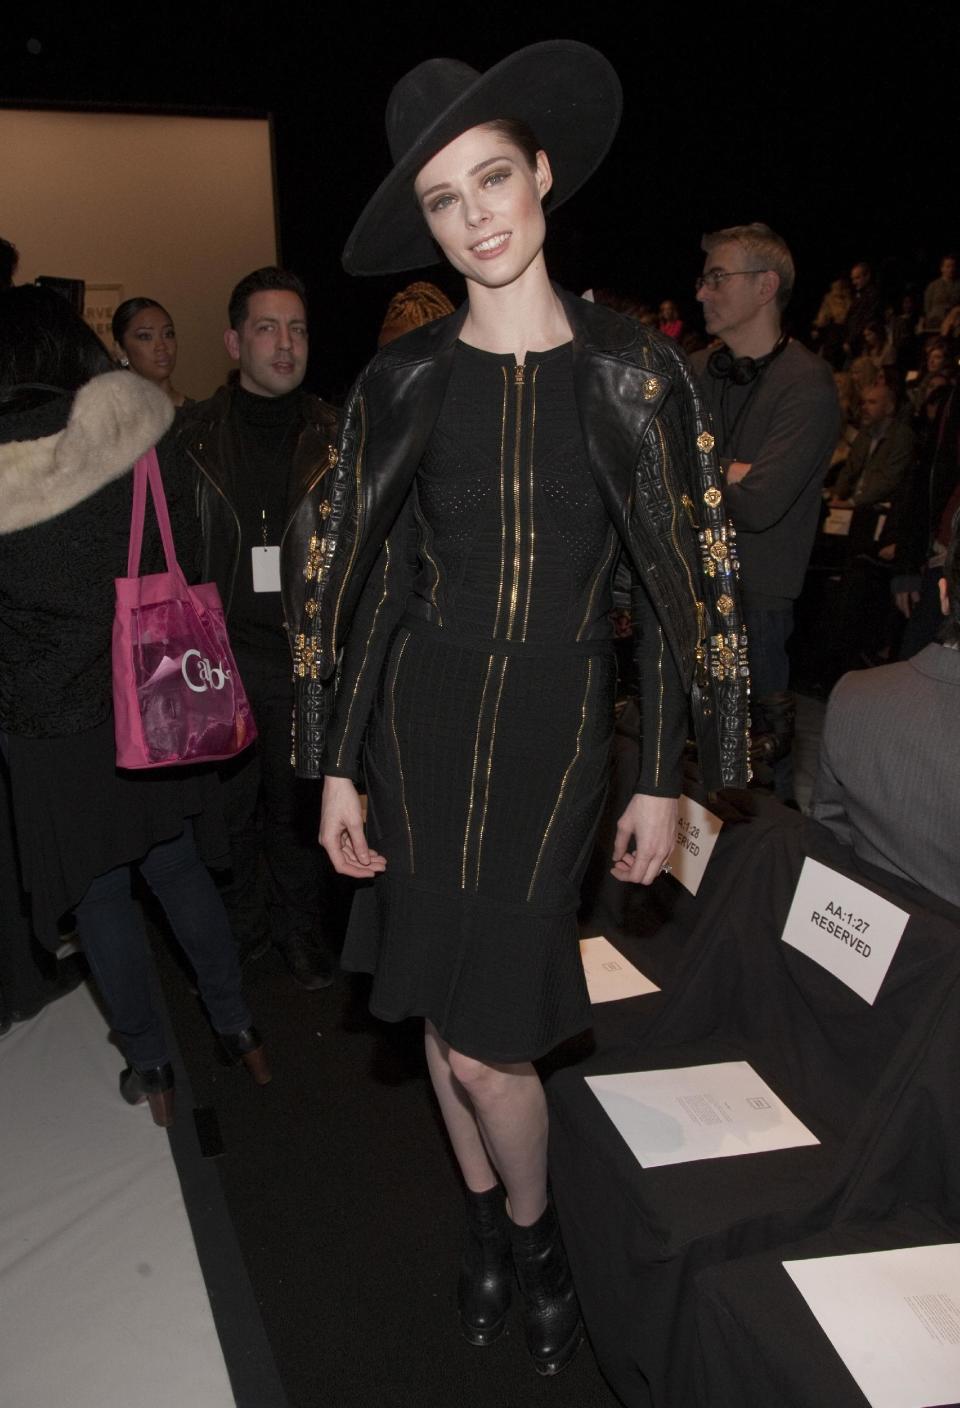 Fashion model Coco Rocha attends the Herve Leger by Max Azria fashion show, on Saturday, Feb. 8, 2014 in New York. (Photo by Andy Kropa/Invision/AP)